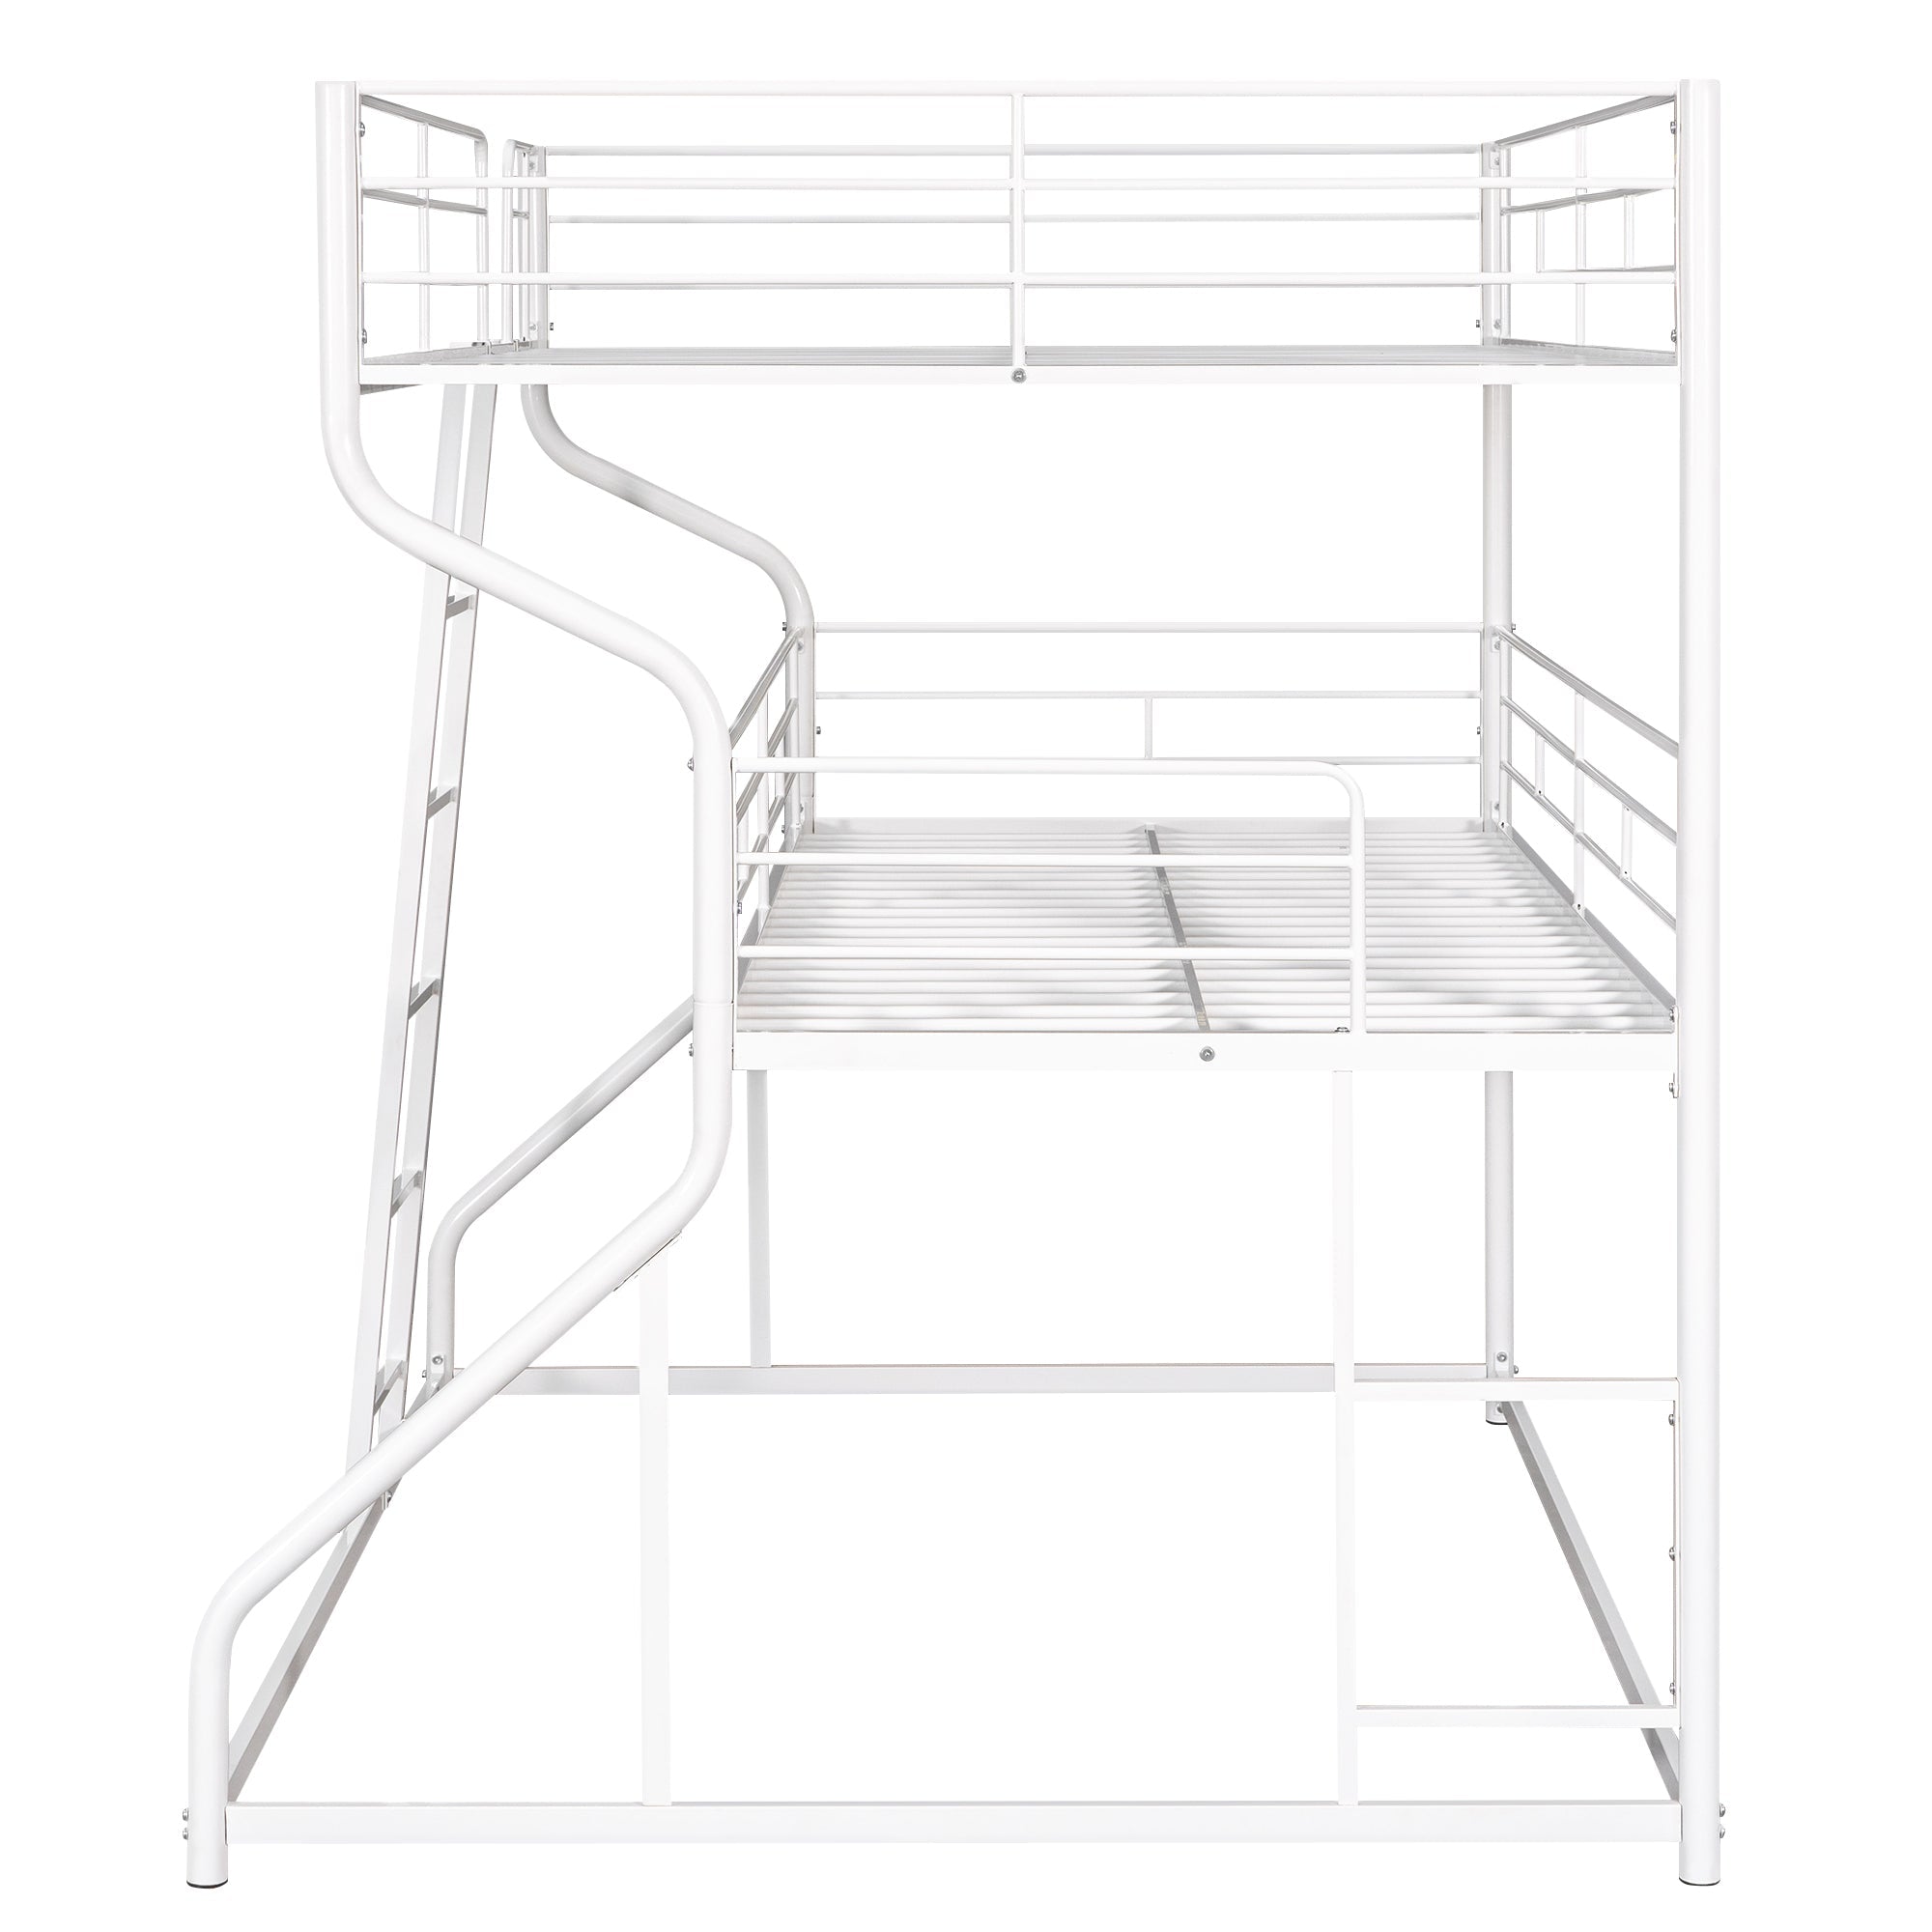 White Triple Bunk Bed: Full XL Top, Twin XL Over Queen Bottom, Long & Short Ladders